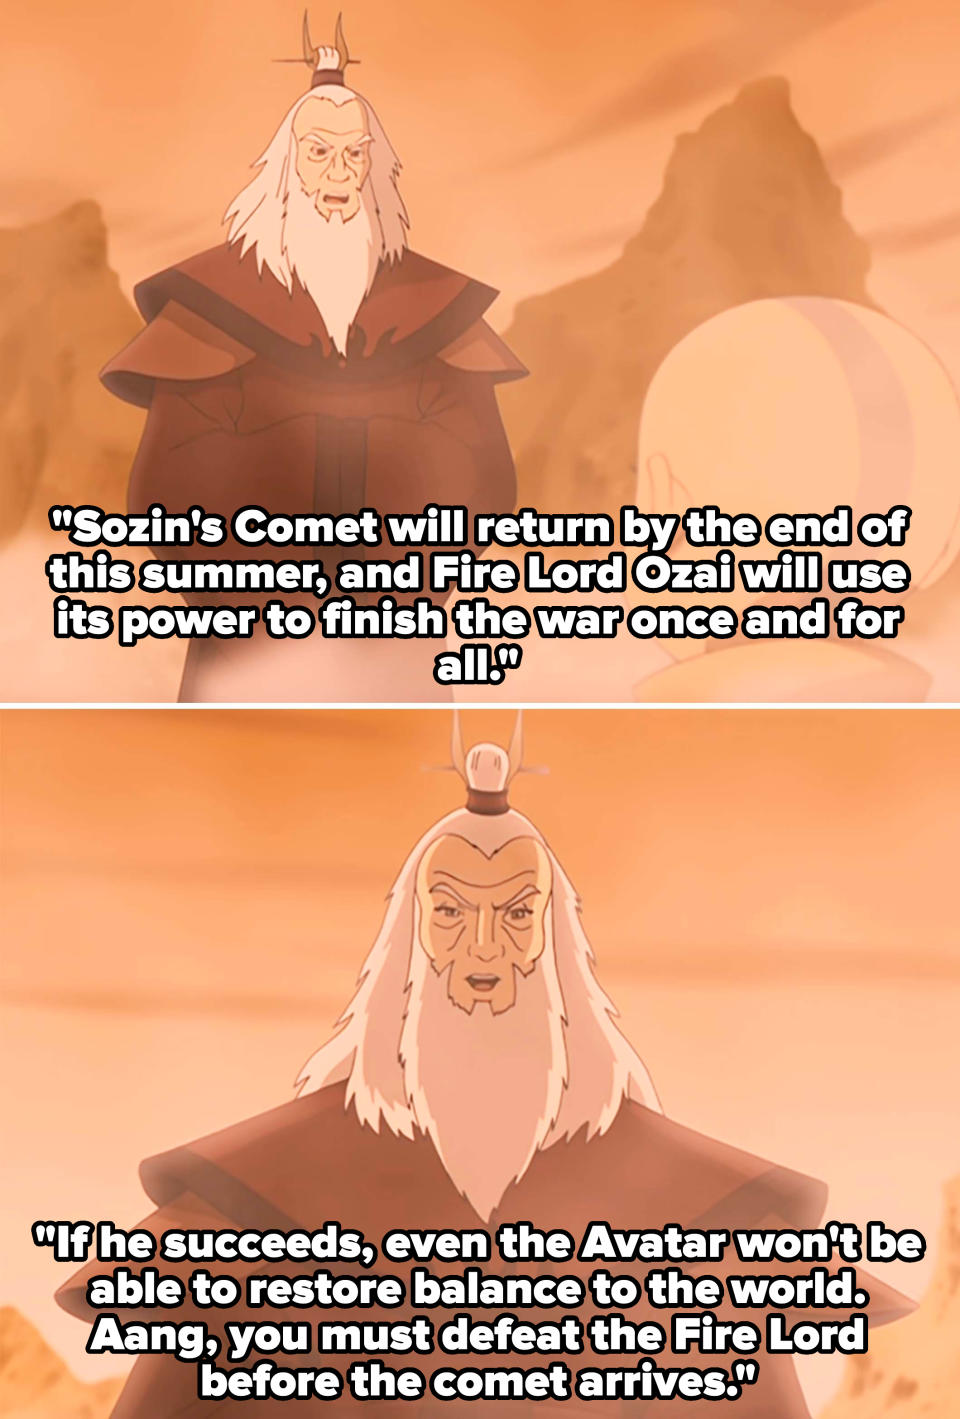 Animated characters Aang and Roku discussing Sozin's comet coming back at the end of the summer